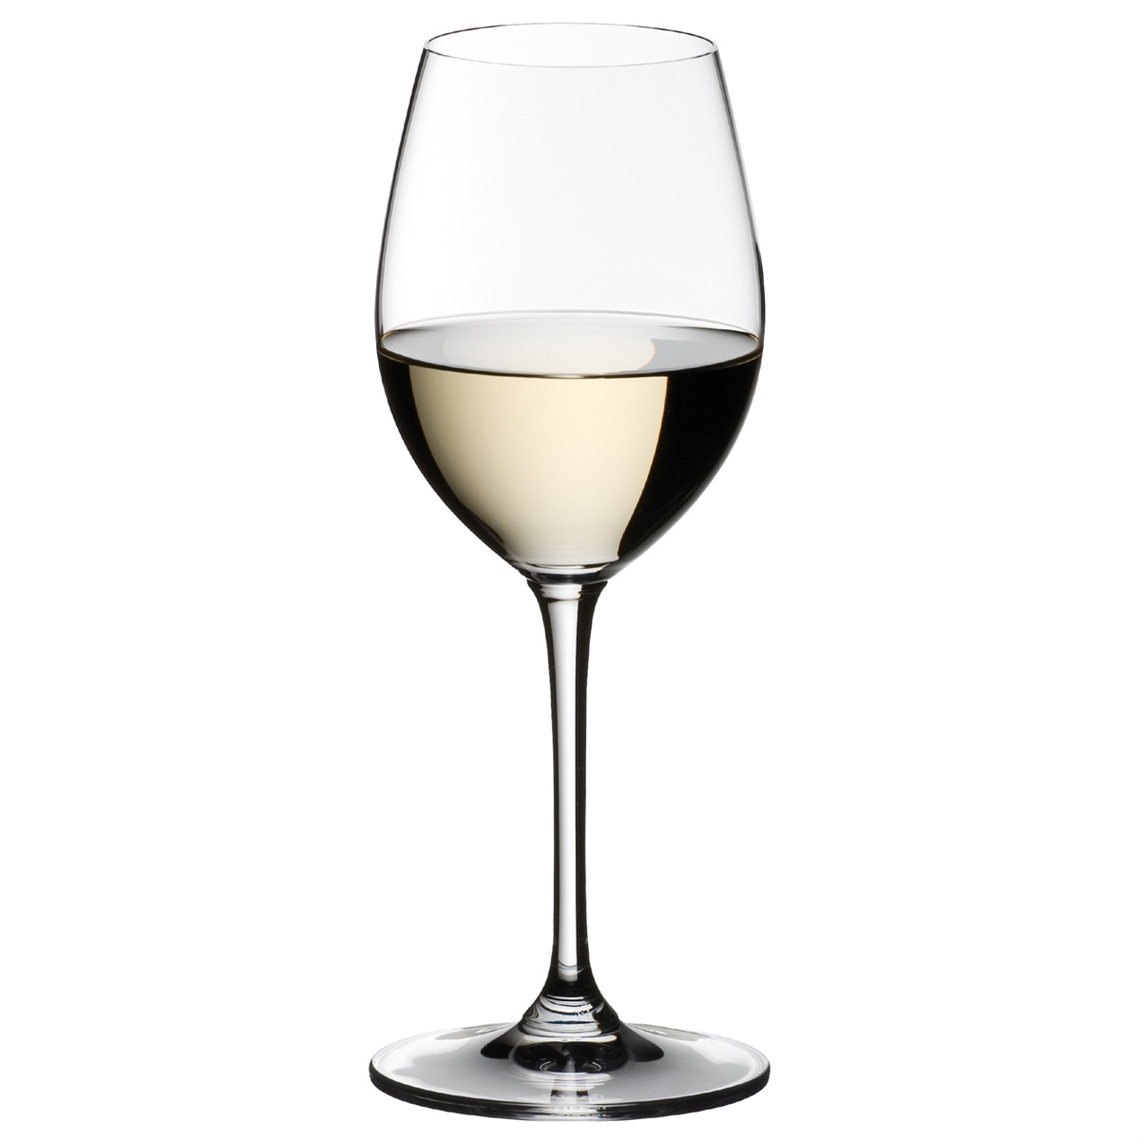 View more riedel from our Dessert Wine Glasses range